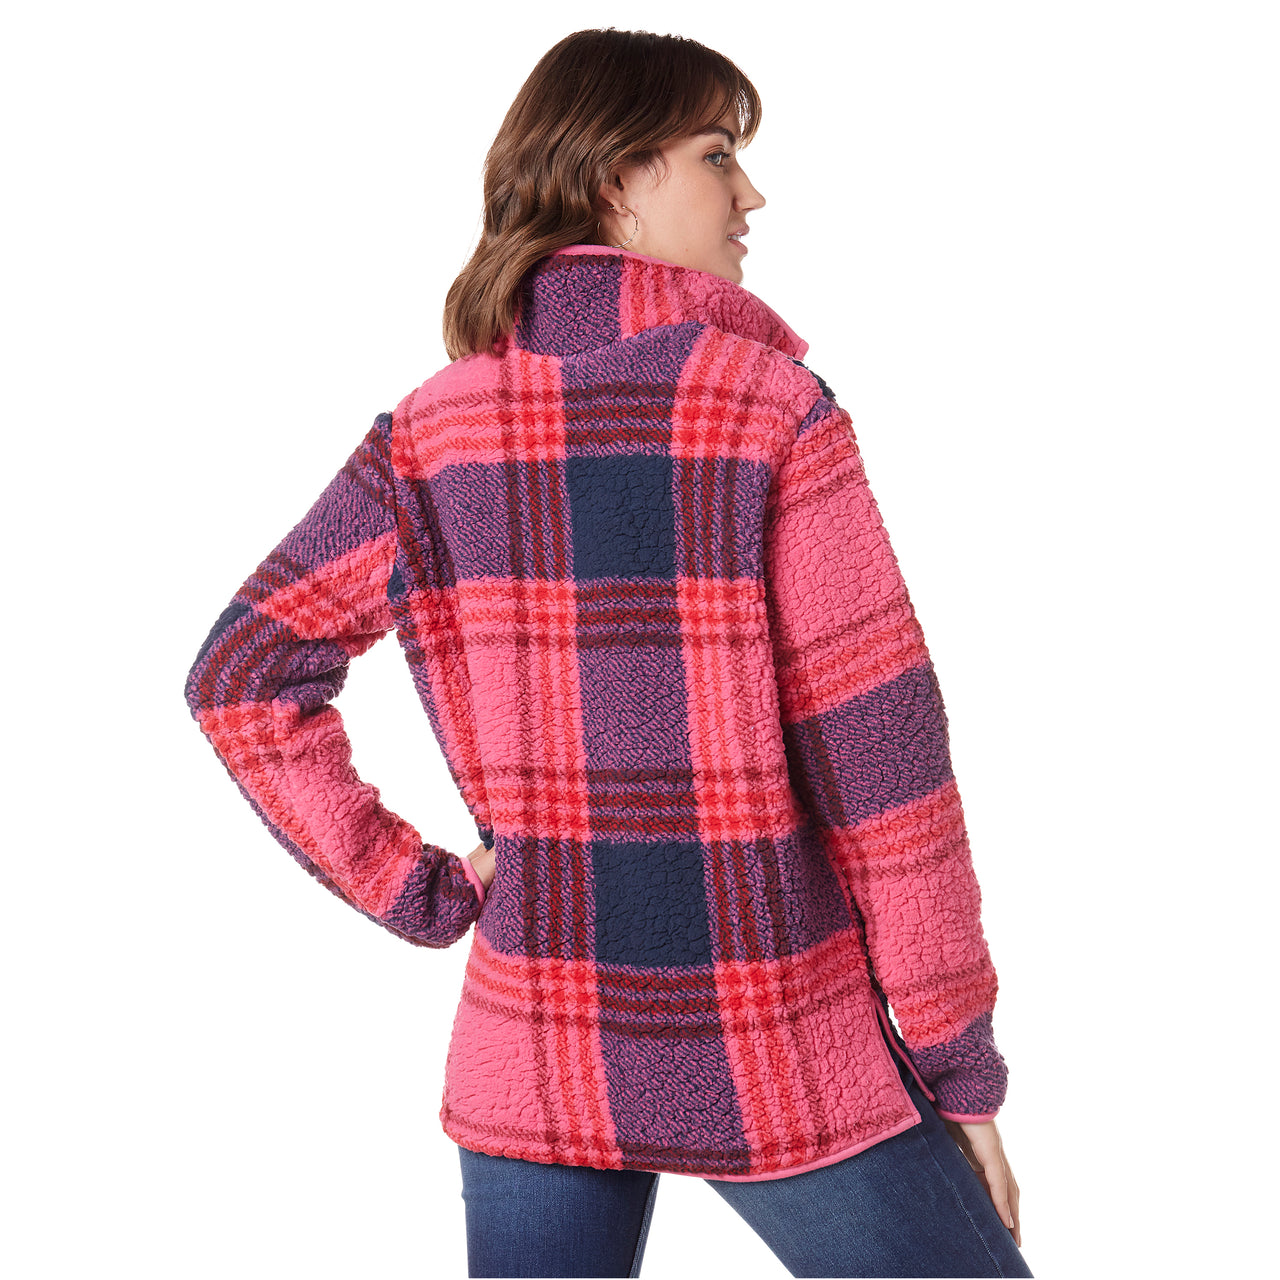 Wrangler Women's LS Sherpa Pullover - Plaid Pink